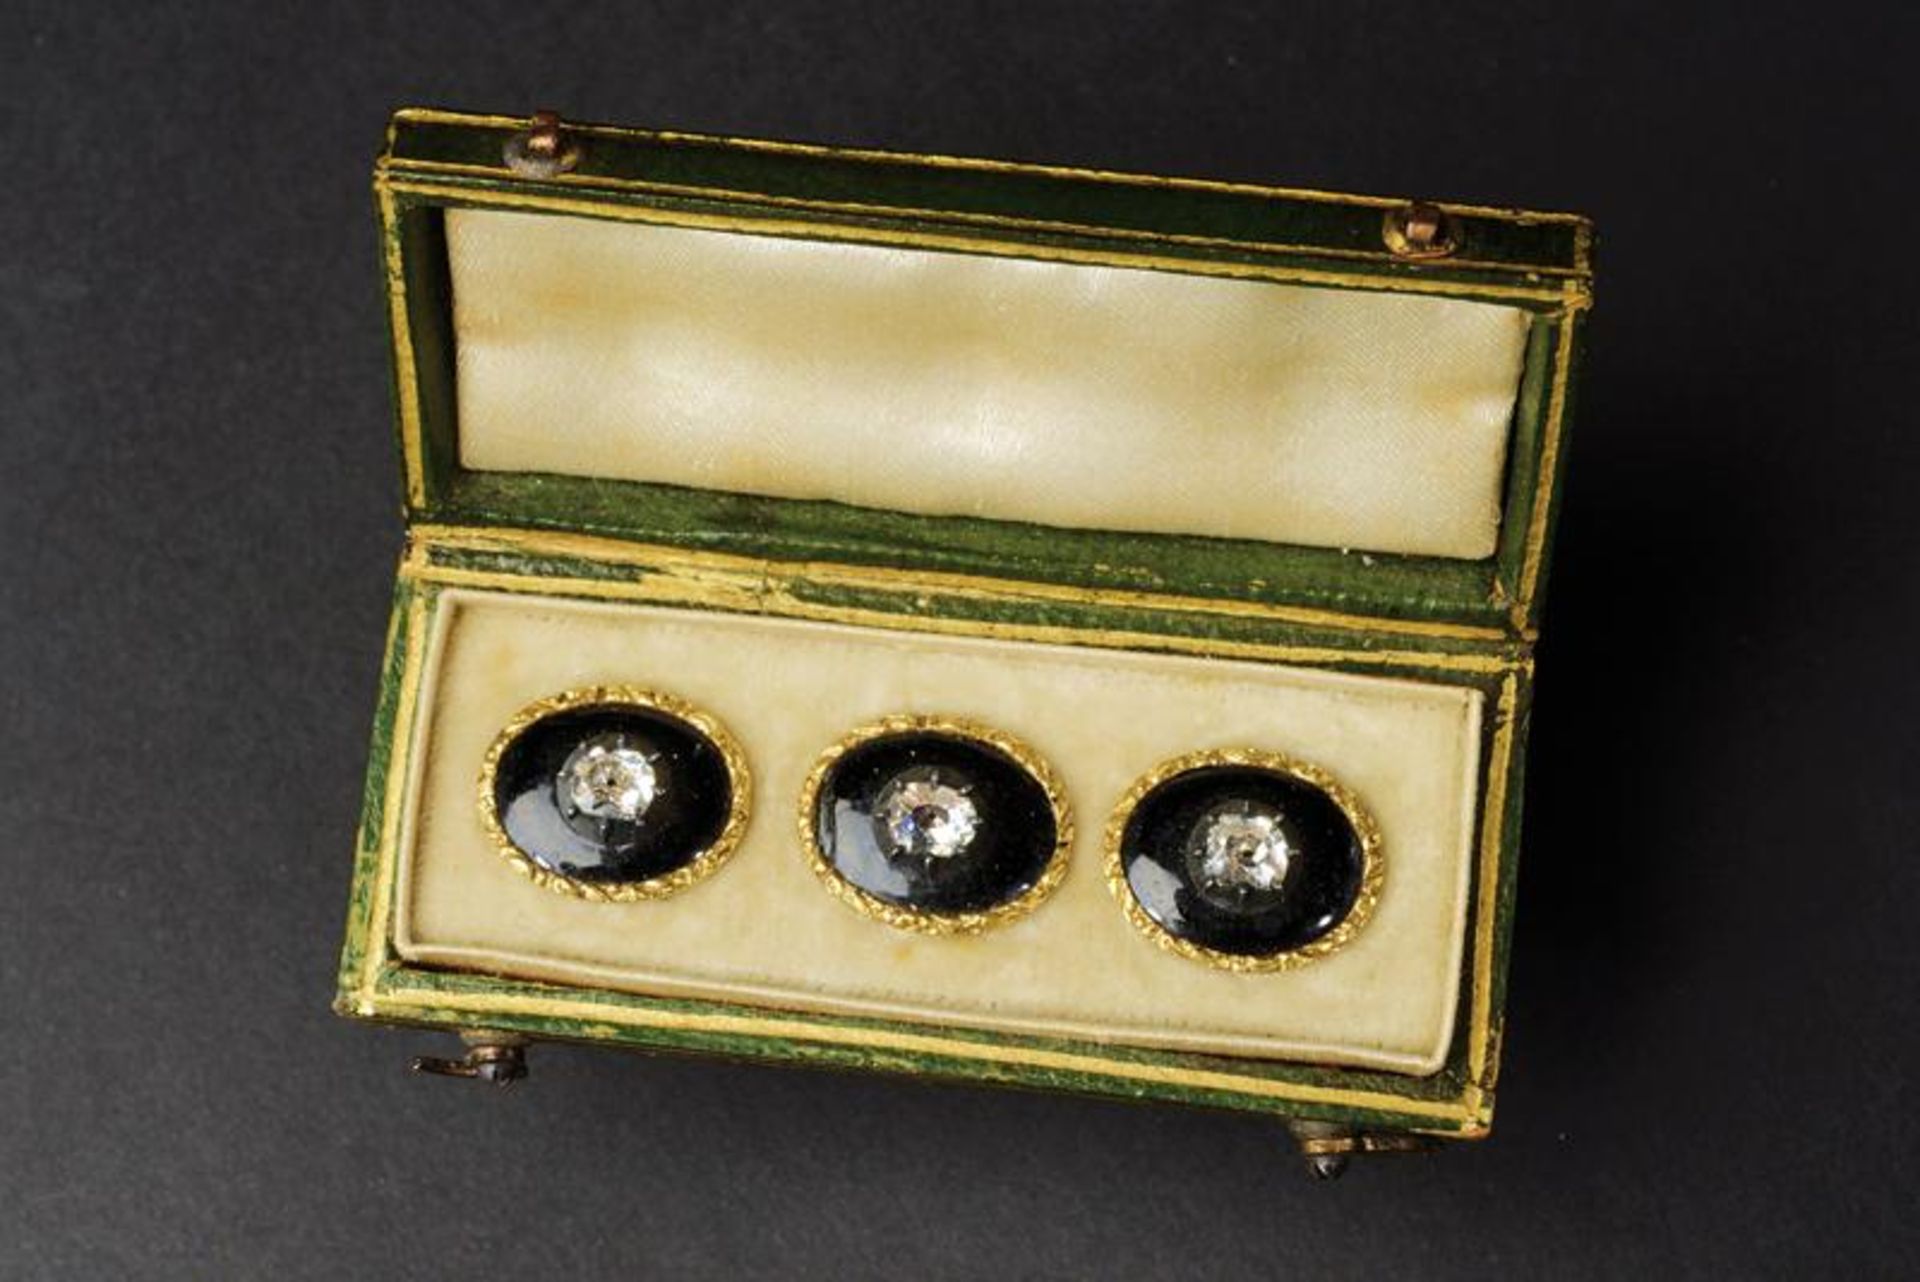 Set of three gold, enamel and diamond buttons